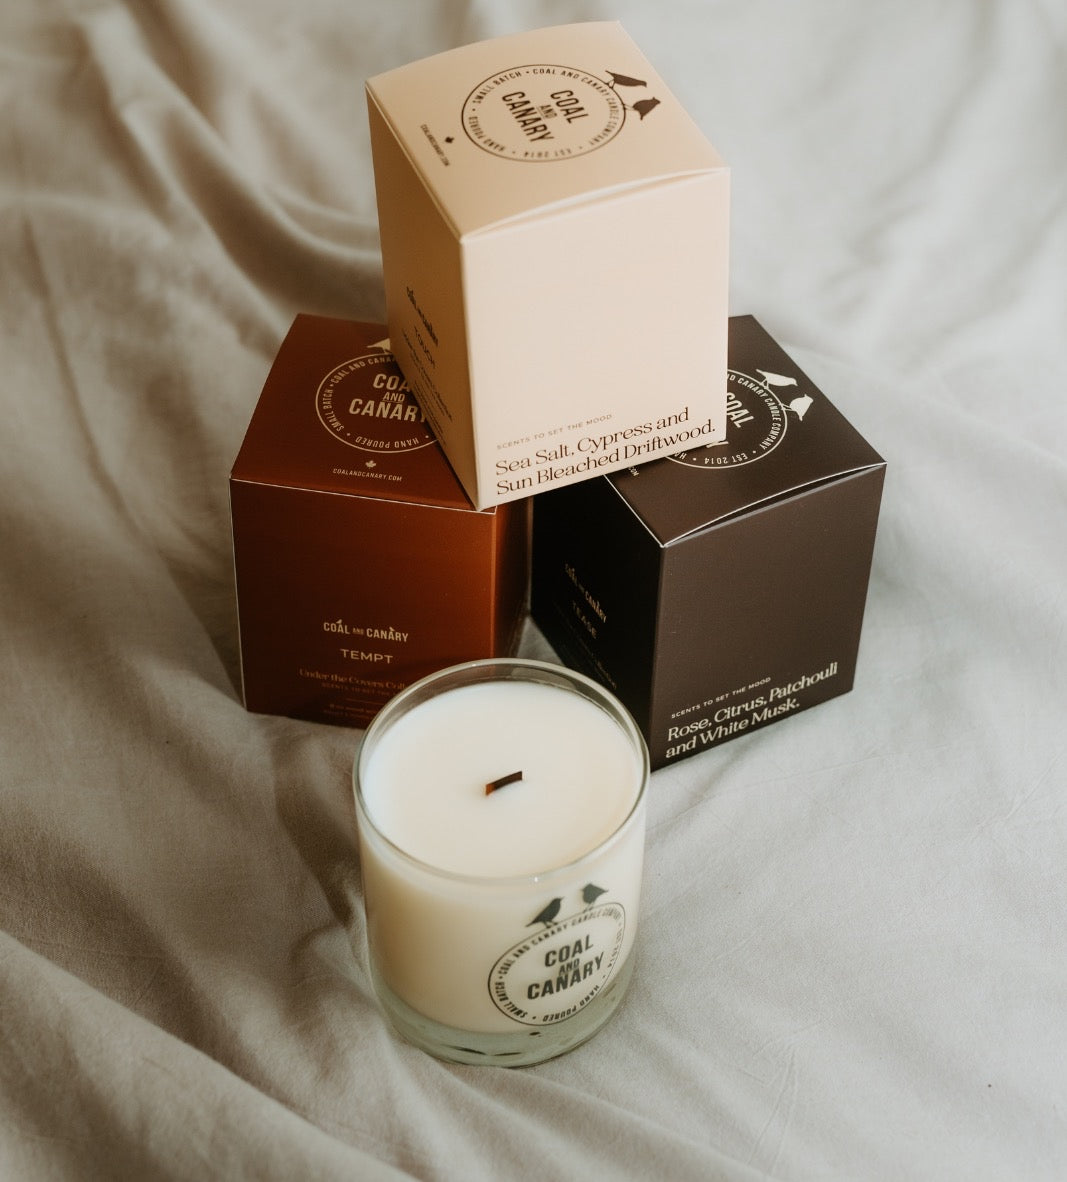 TEMPT CANDLE